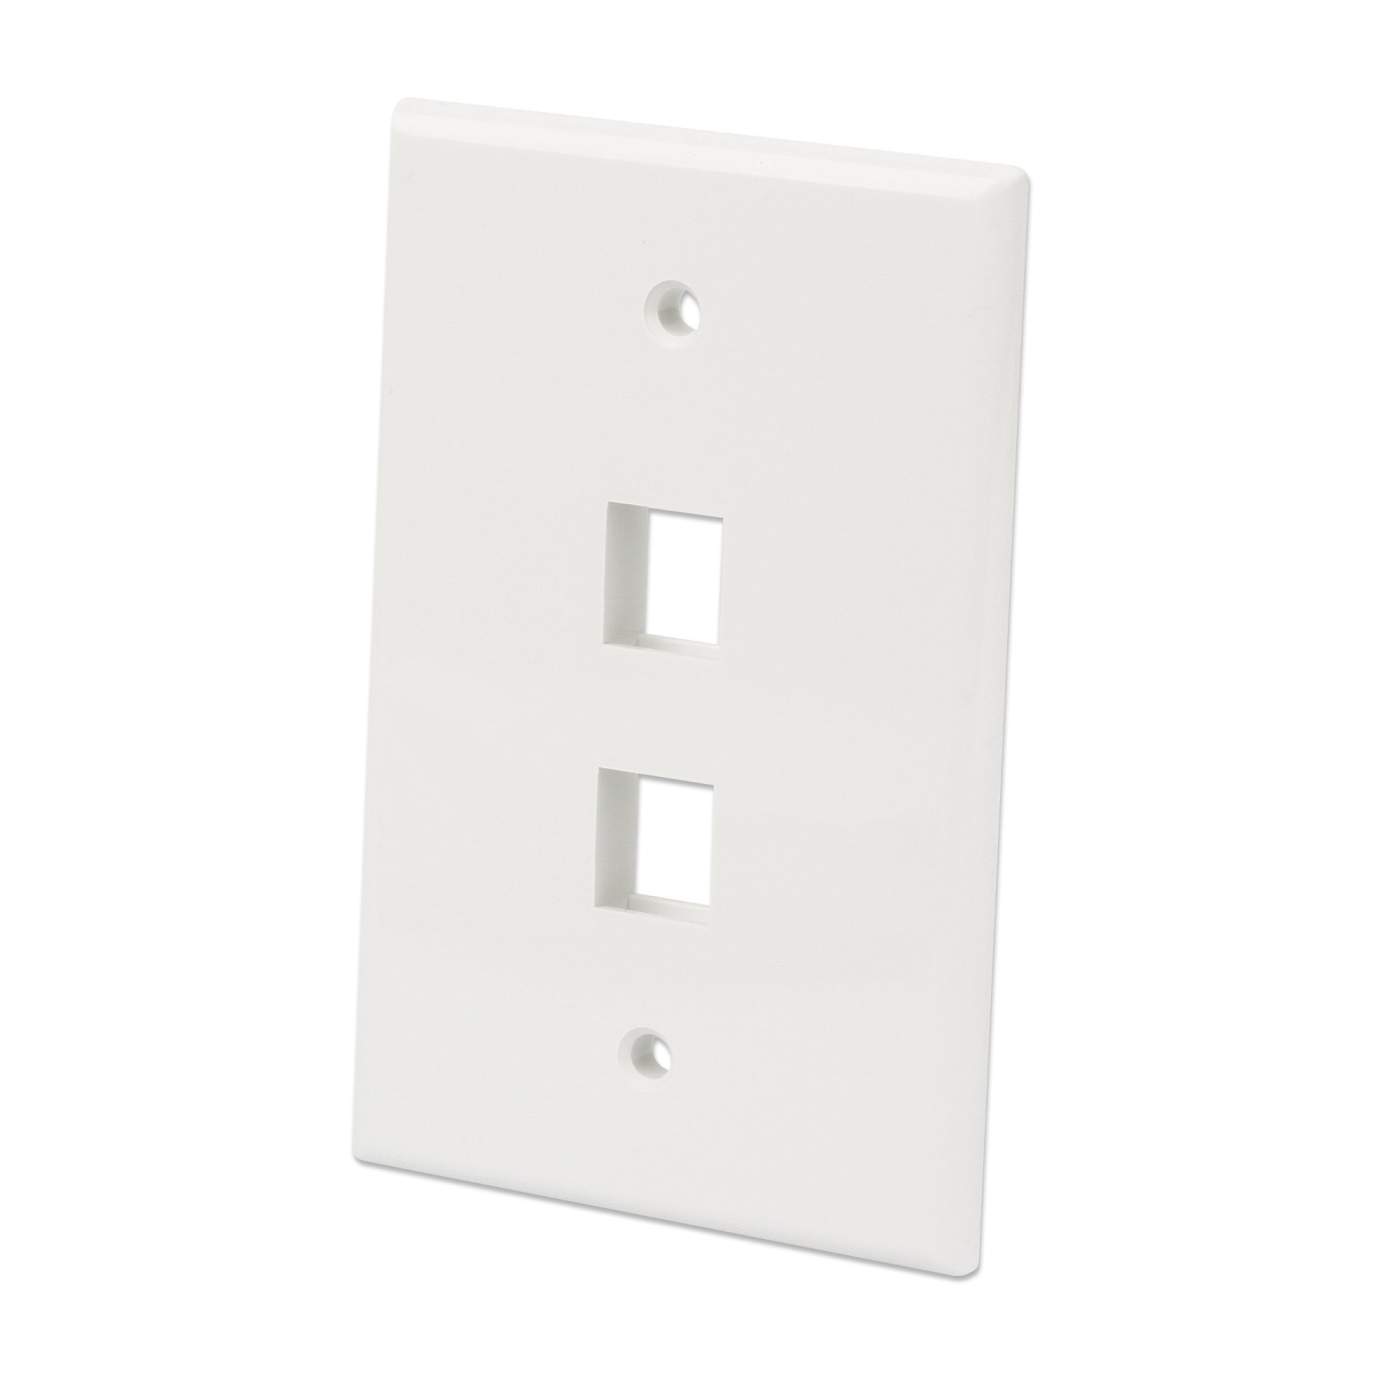 2-Outlet Oversized Keystone Wall Plate Image 1